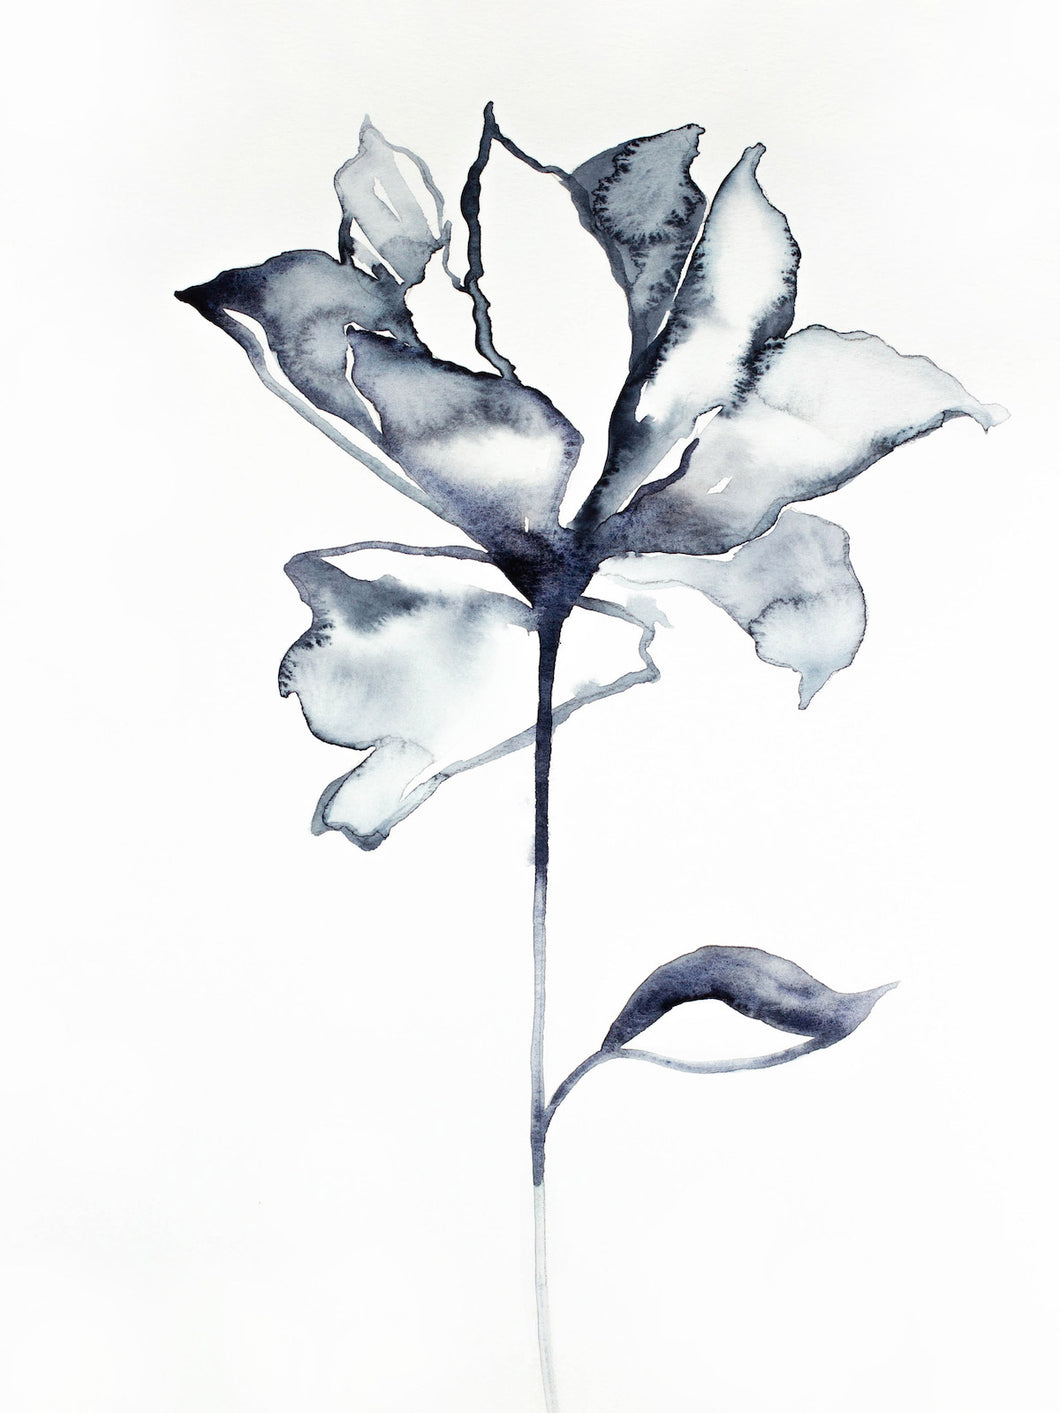 9” x 12” original watercolor botanical floral rose painting in an expressive, impressionist, minimalist, modern style by contemporary fine artist Elizabeth Becker. Soft black, gray and white colors.